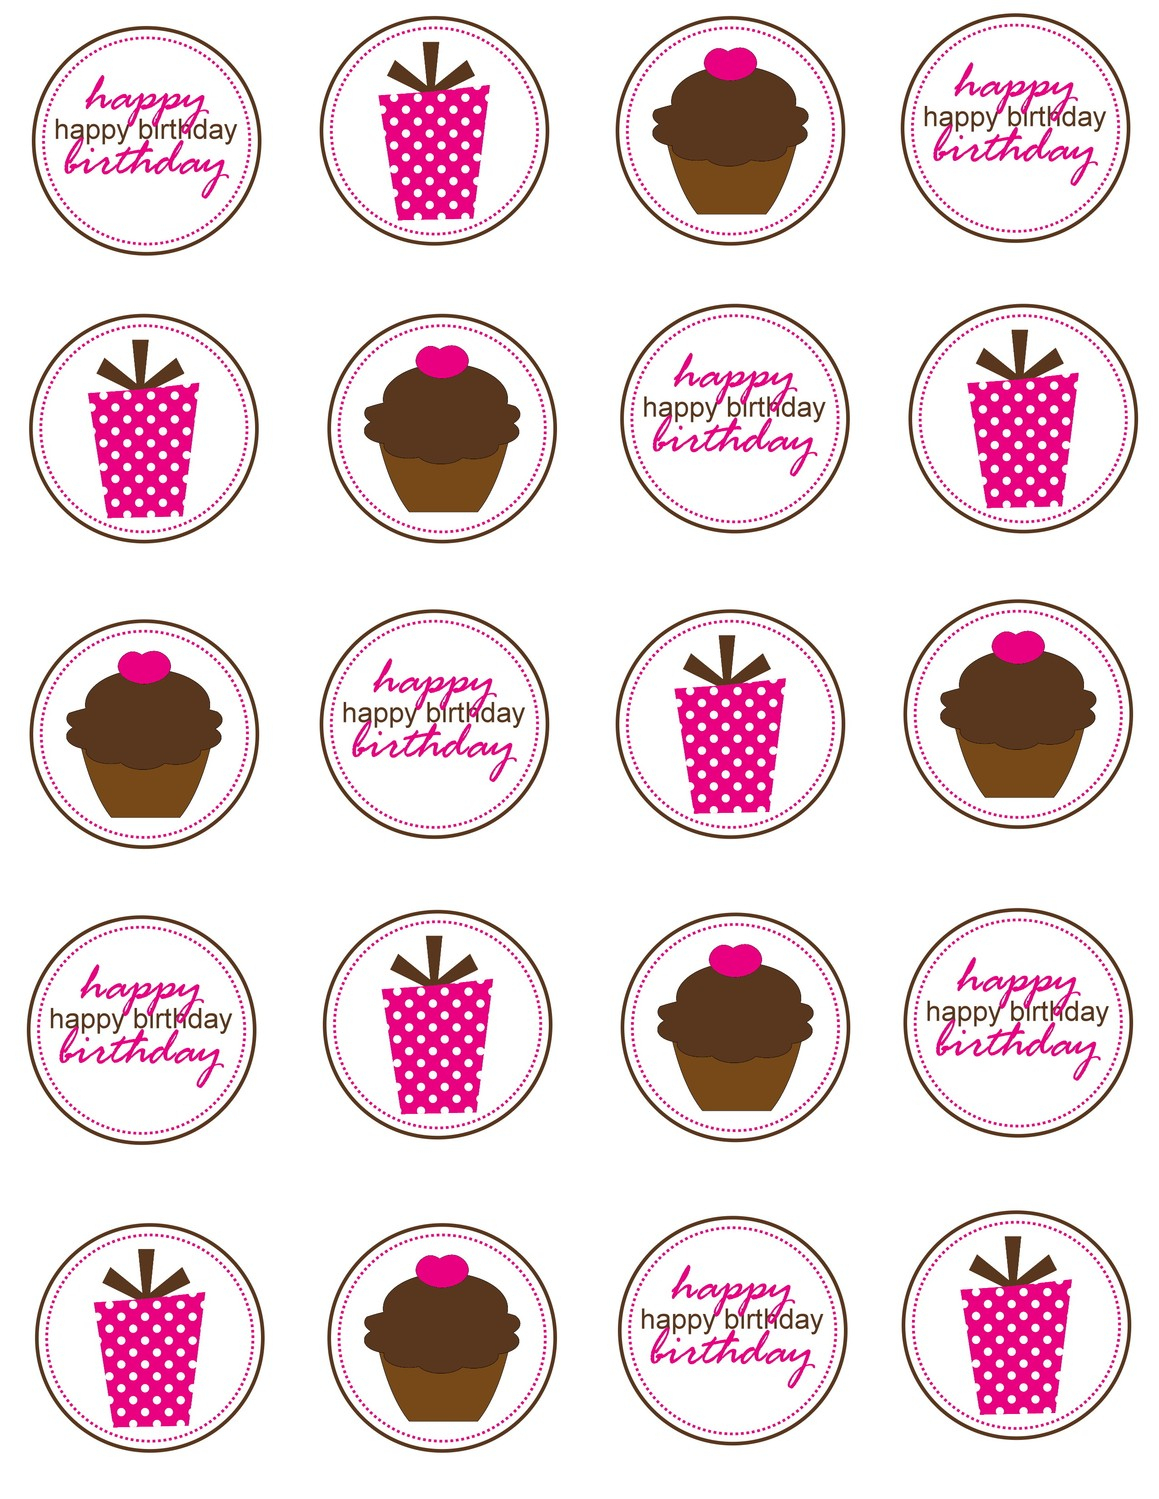 8 Cupcakes Ring Toppers Printables Photo - Diamond Ring Drink Tags - Cupcake Topper Templates Free Printable